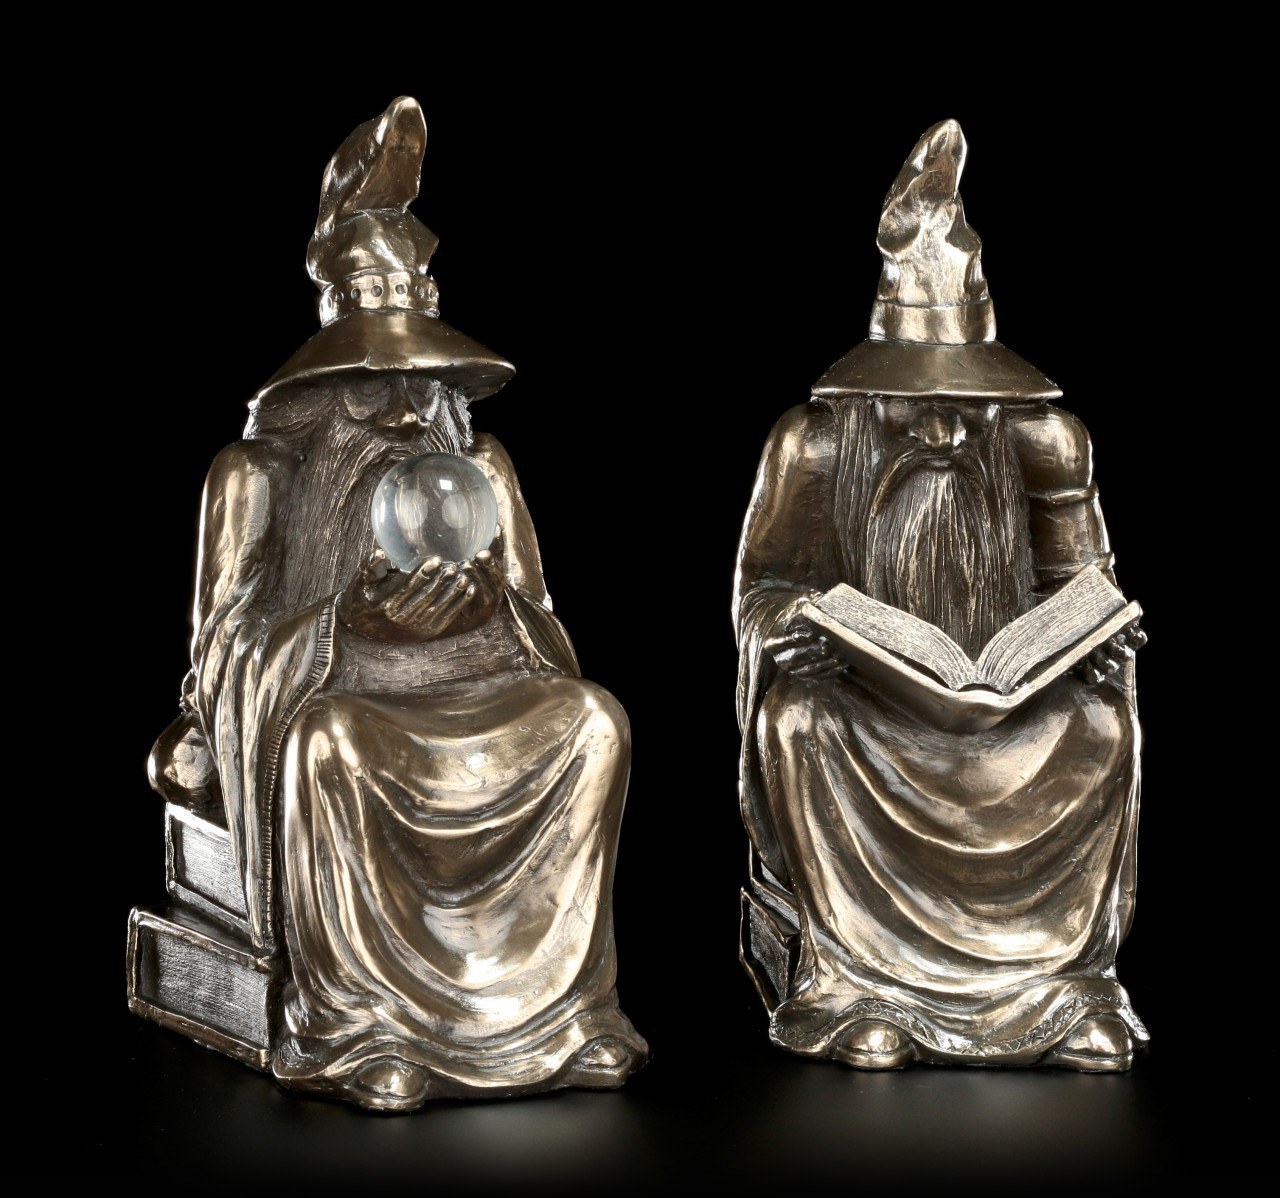 Bookends - Wizards - by Design Clinic